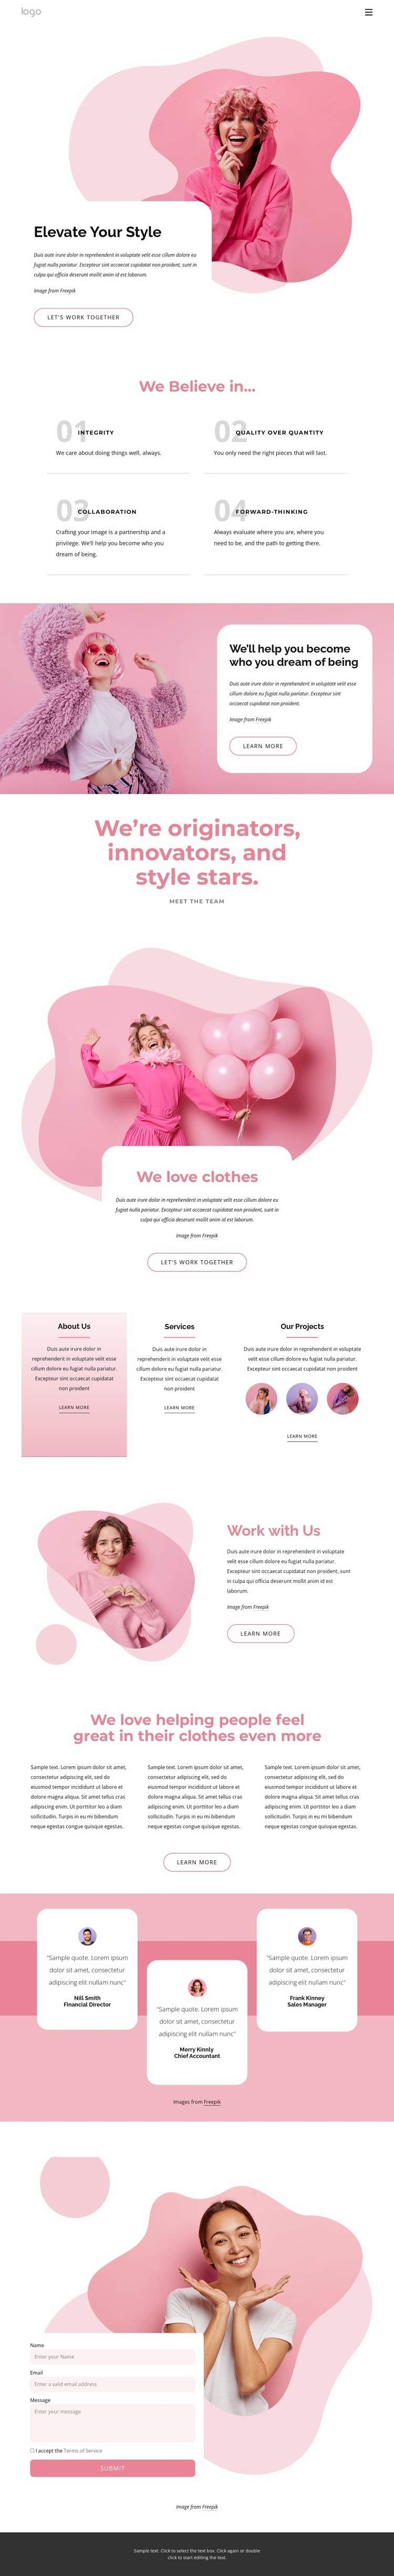 Elevate your style Webflow Template Alternative